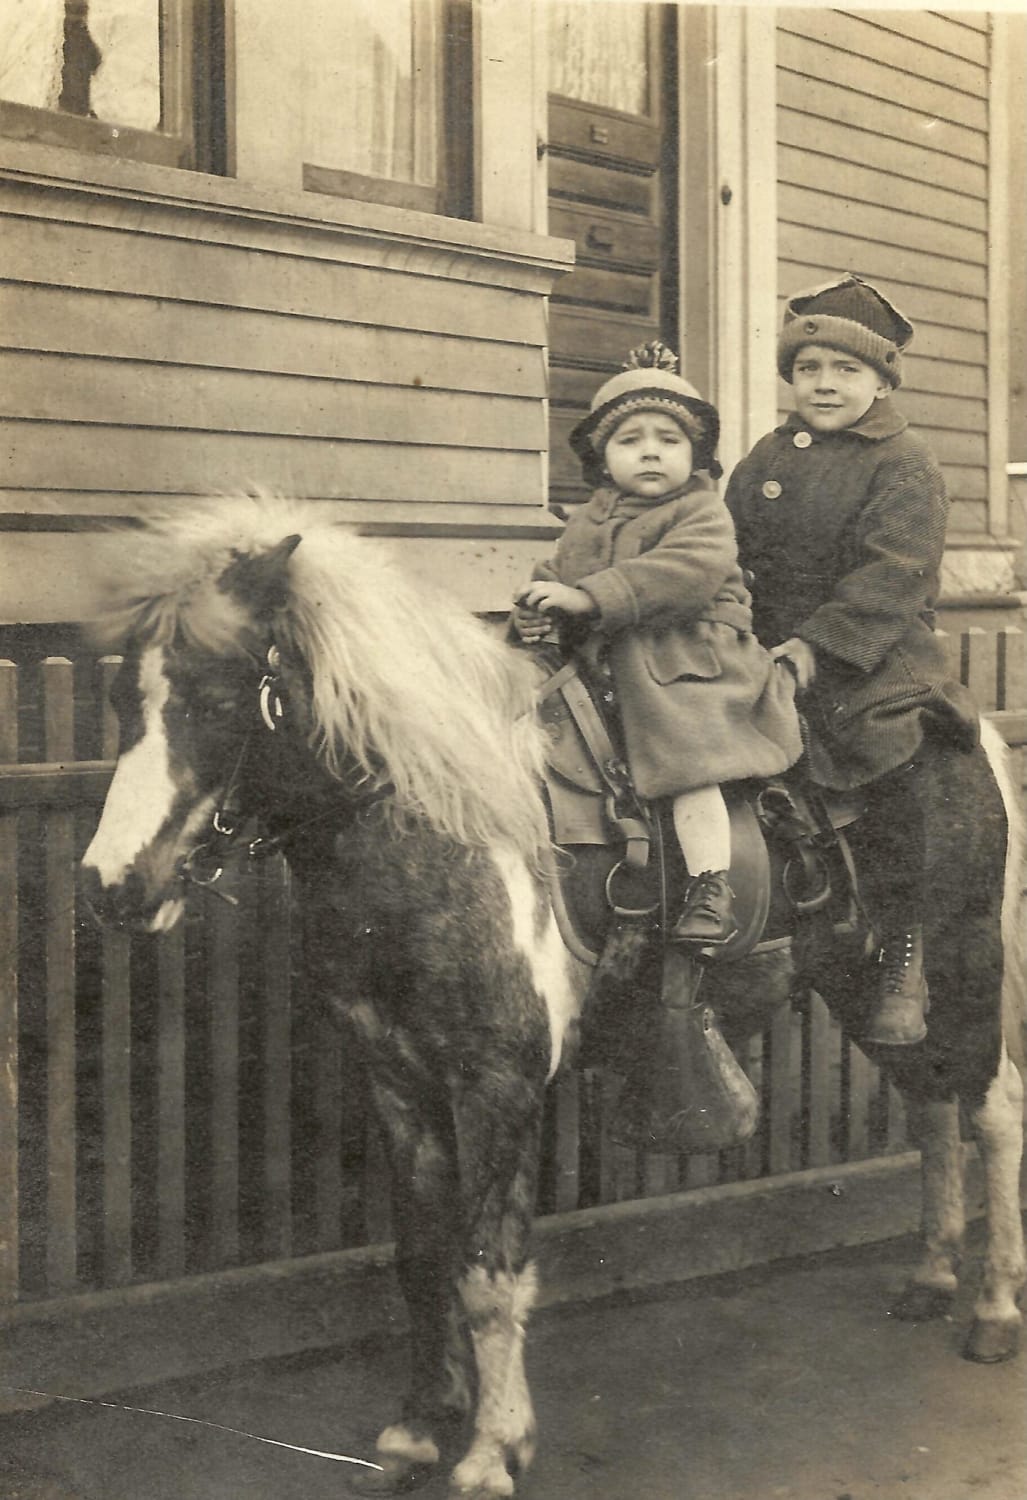 My grandfather and his brother on a pony outside their home in Providence, RI., 1924